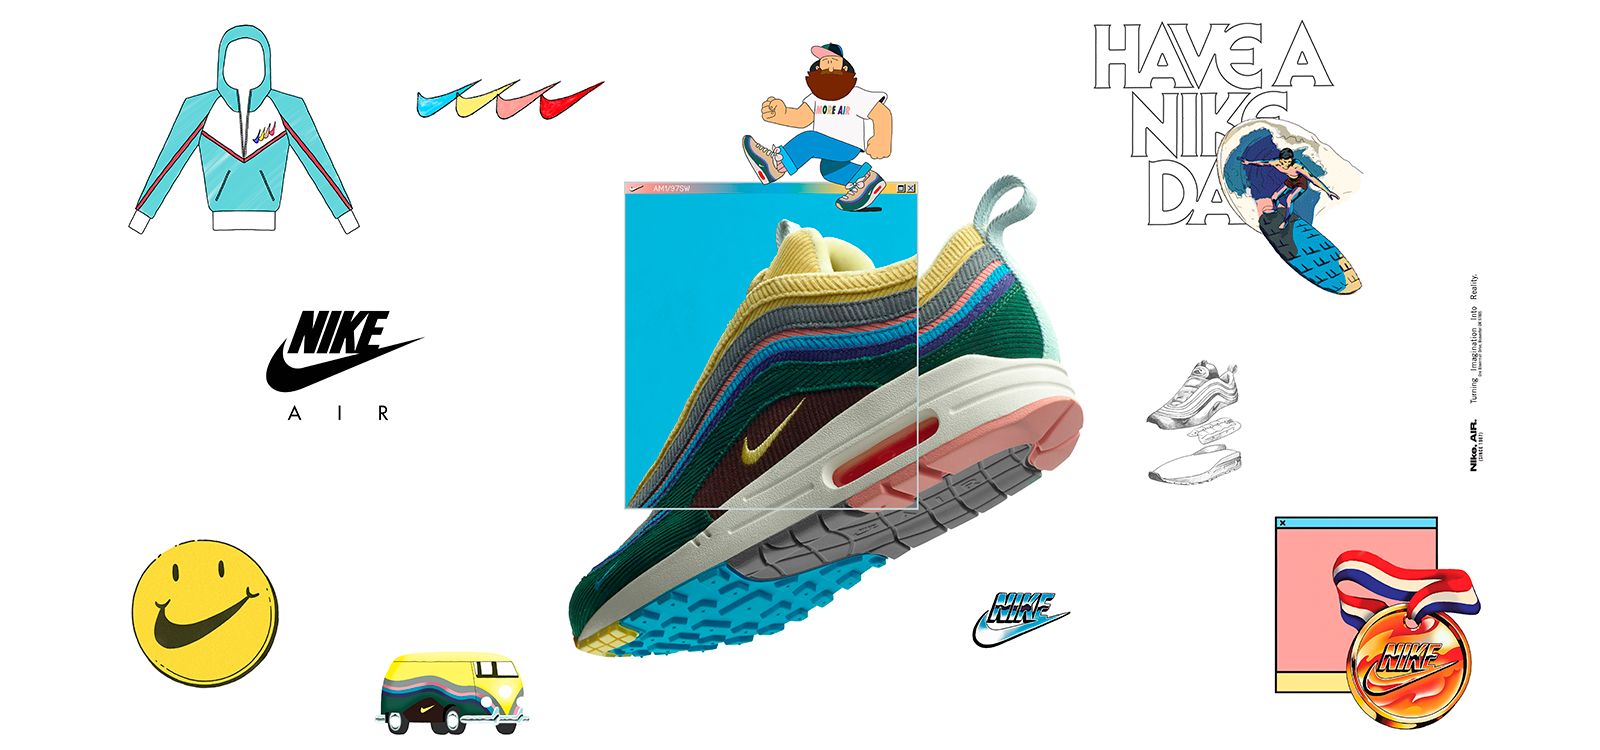 AIR MAX 1/97 "SEAN WOTHERSPOON"